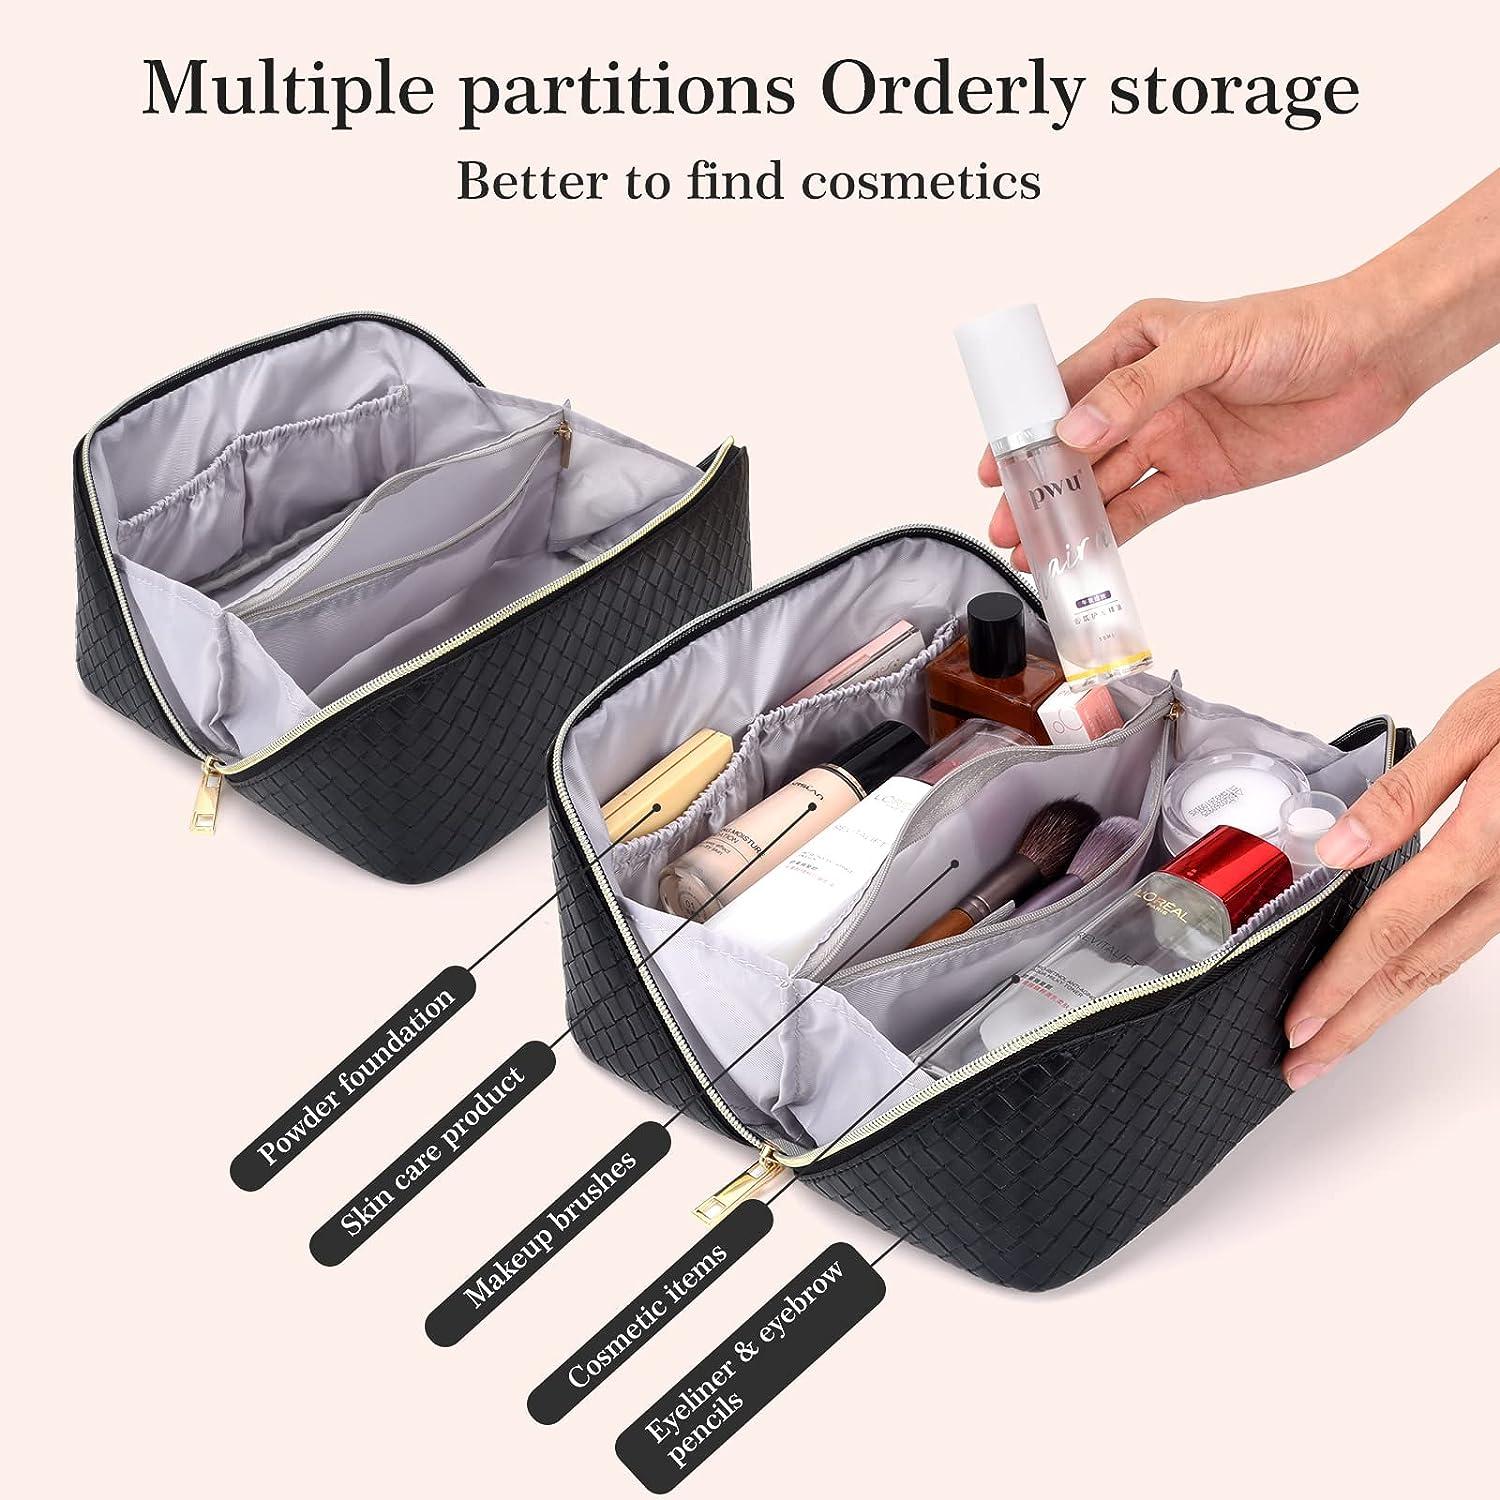  Travel Makeup Bag for Women Large Capacity Cosmetic Bag  Waterproof Black Checkered Portable PU Leather Toiletry Bag Organizer Makeup  Brushes Storage Bag with Dividers and Handle : Beauty & Personal